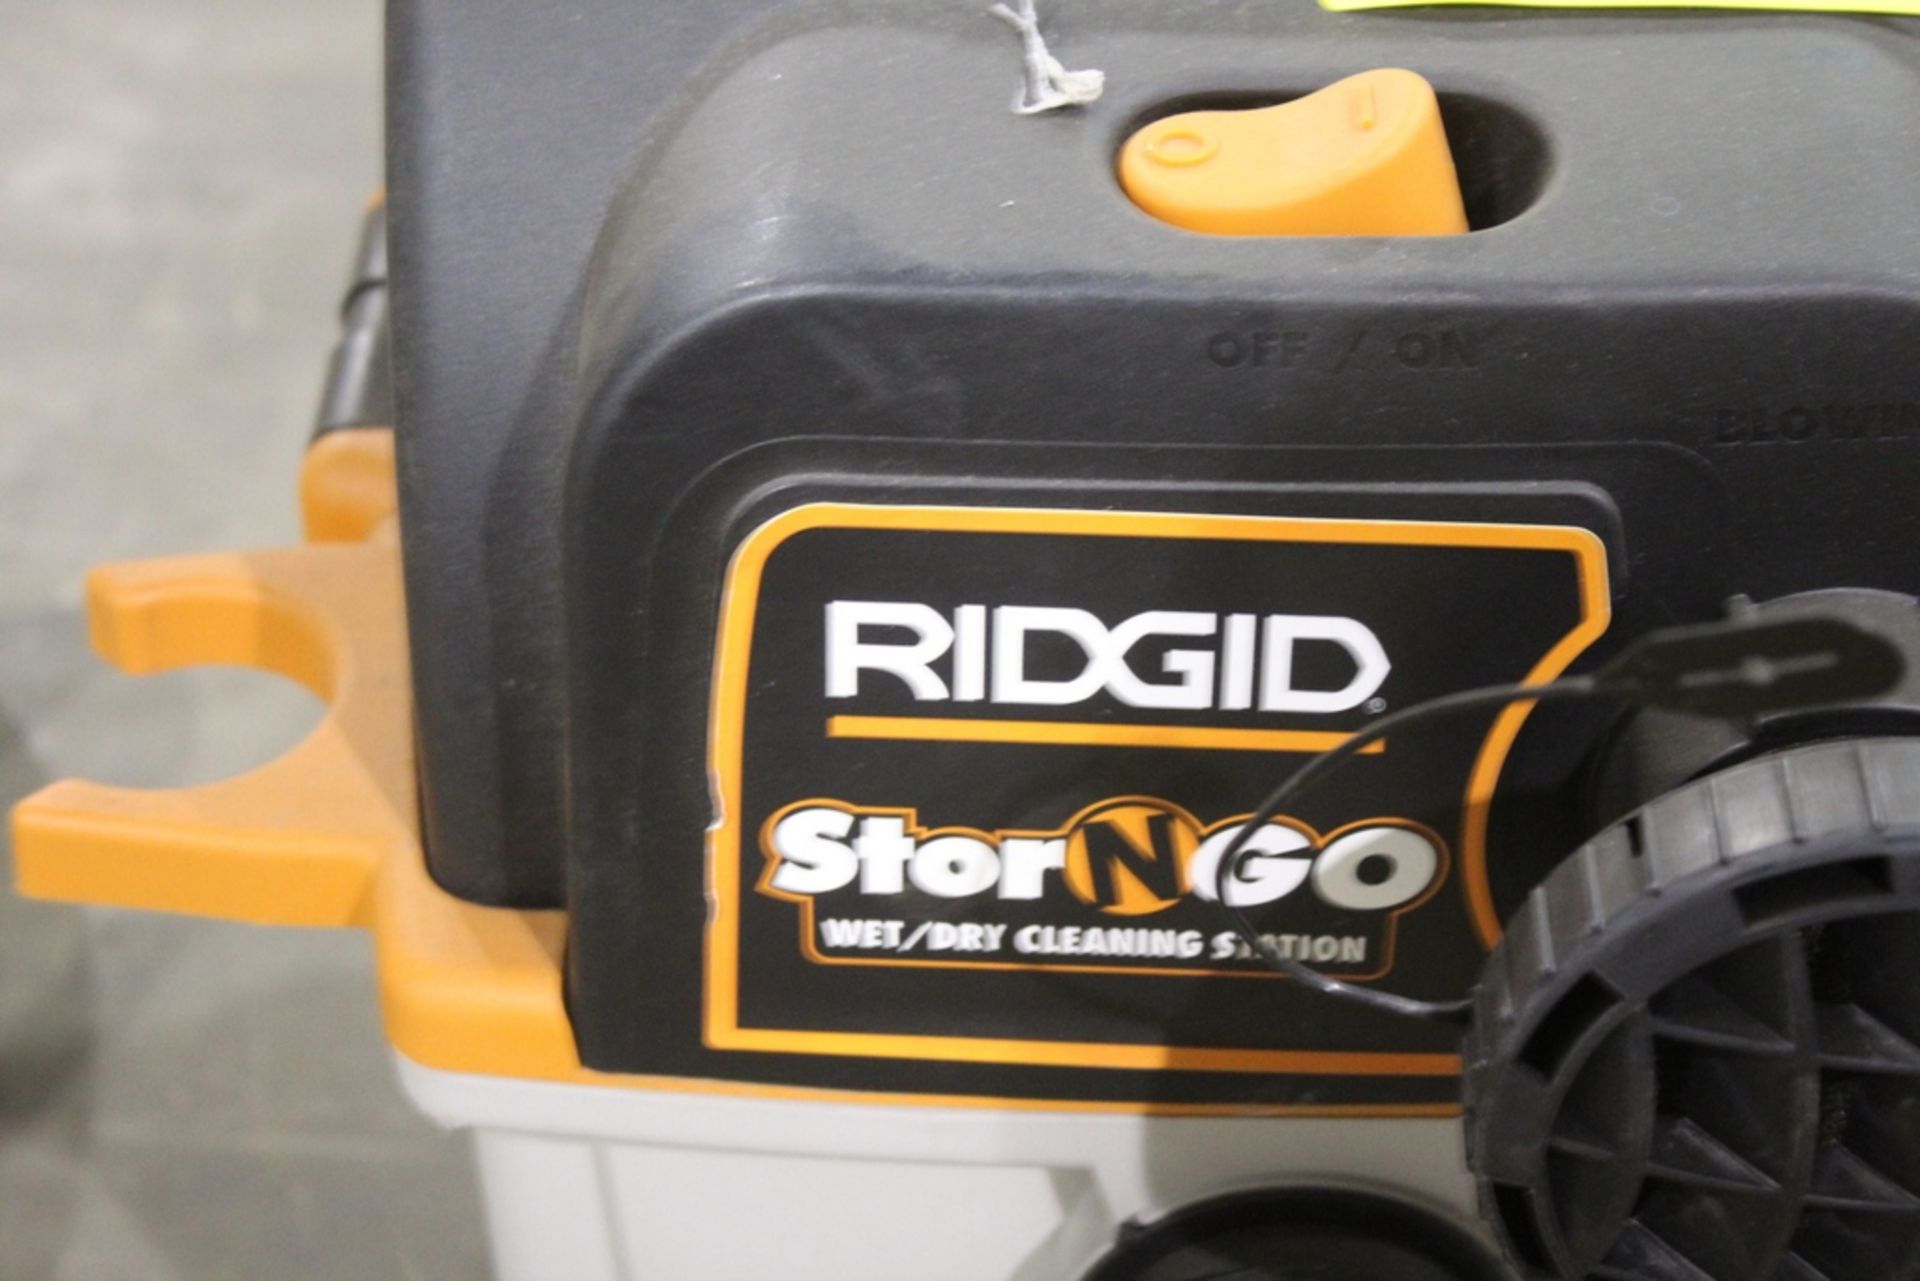 RIDGID STOR-NO-GO WET DRY CLEANING STATION - Image 2 of 2